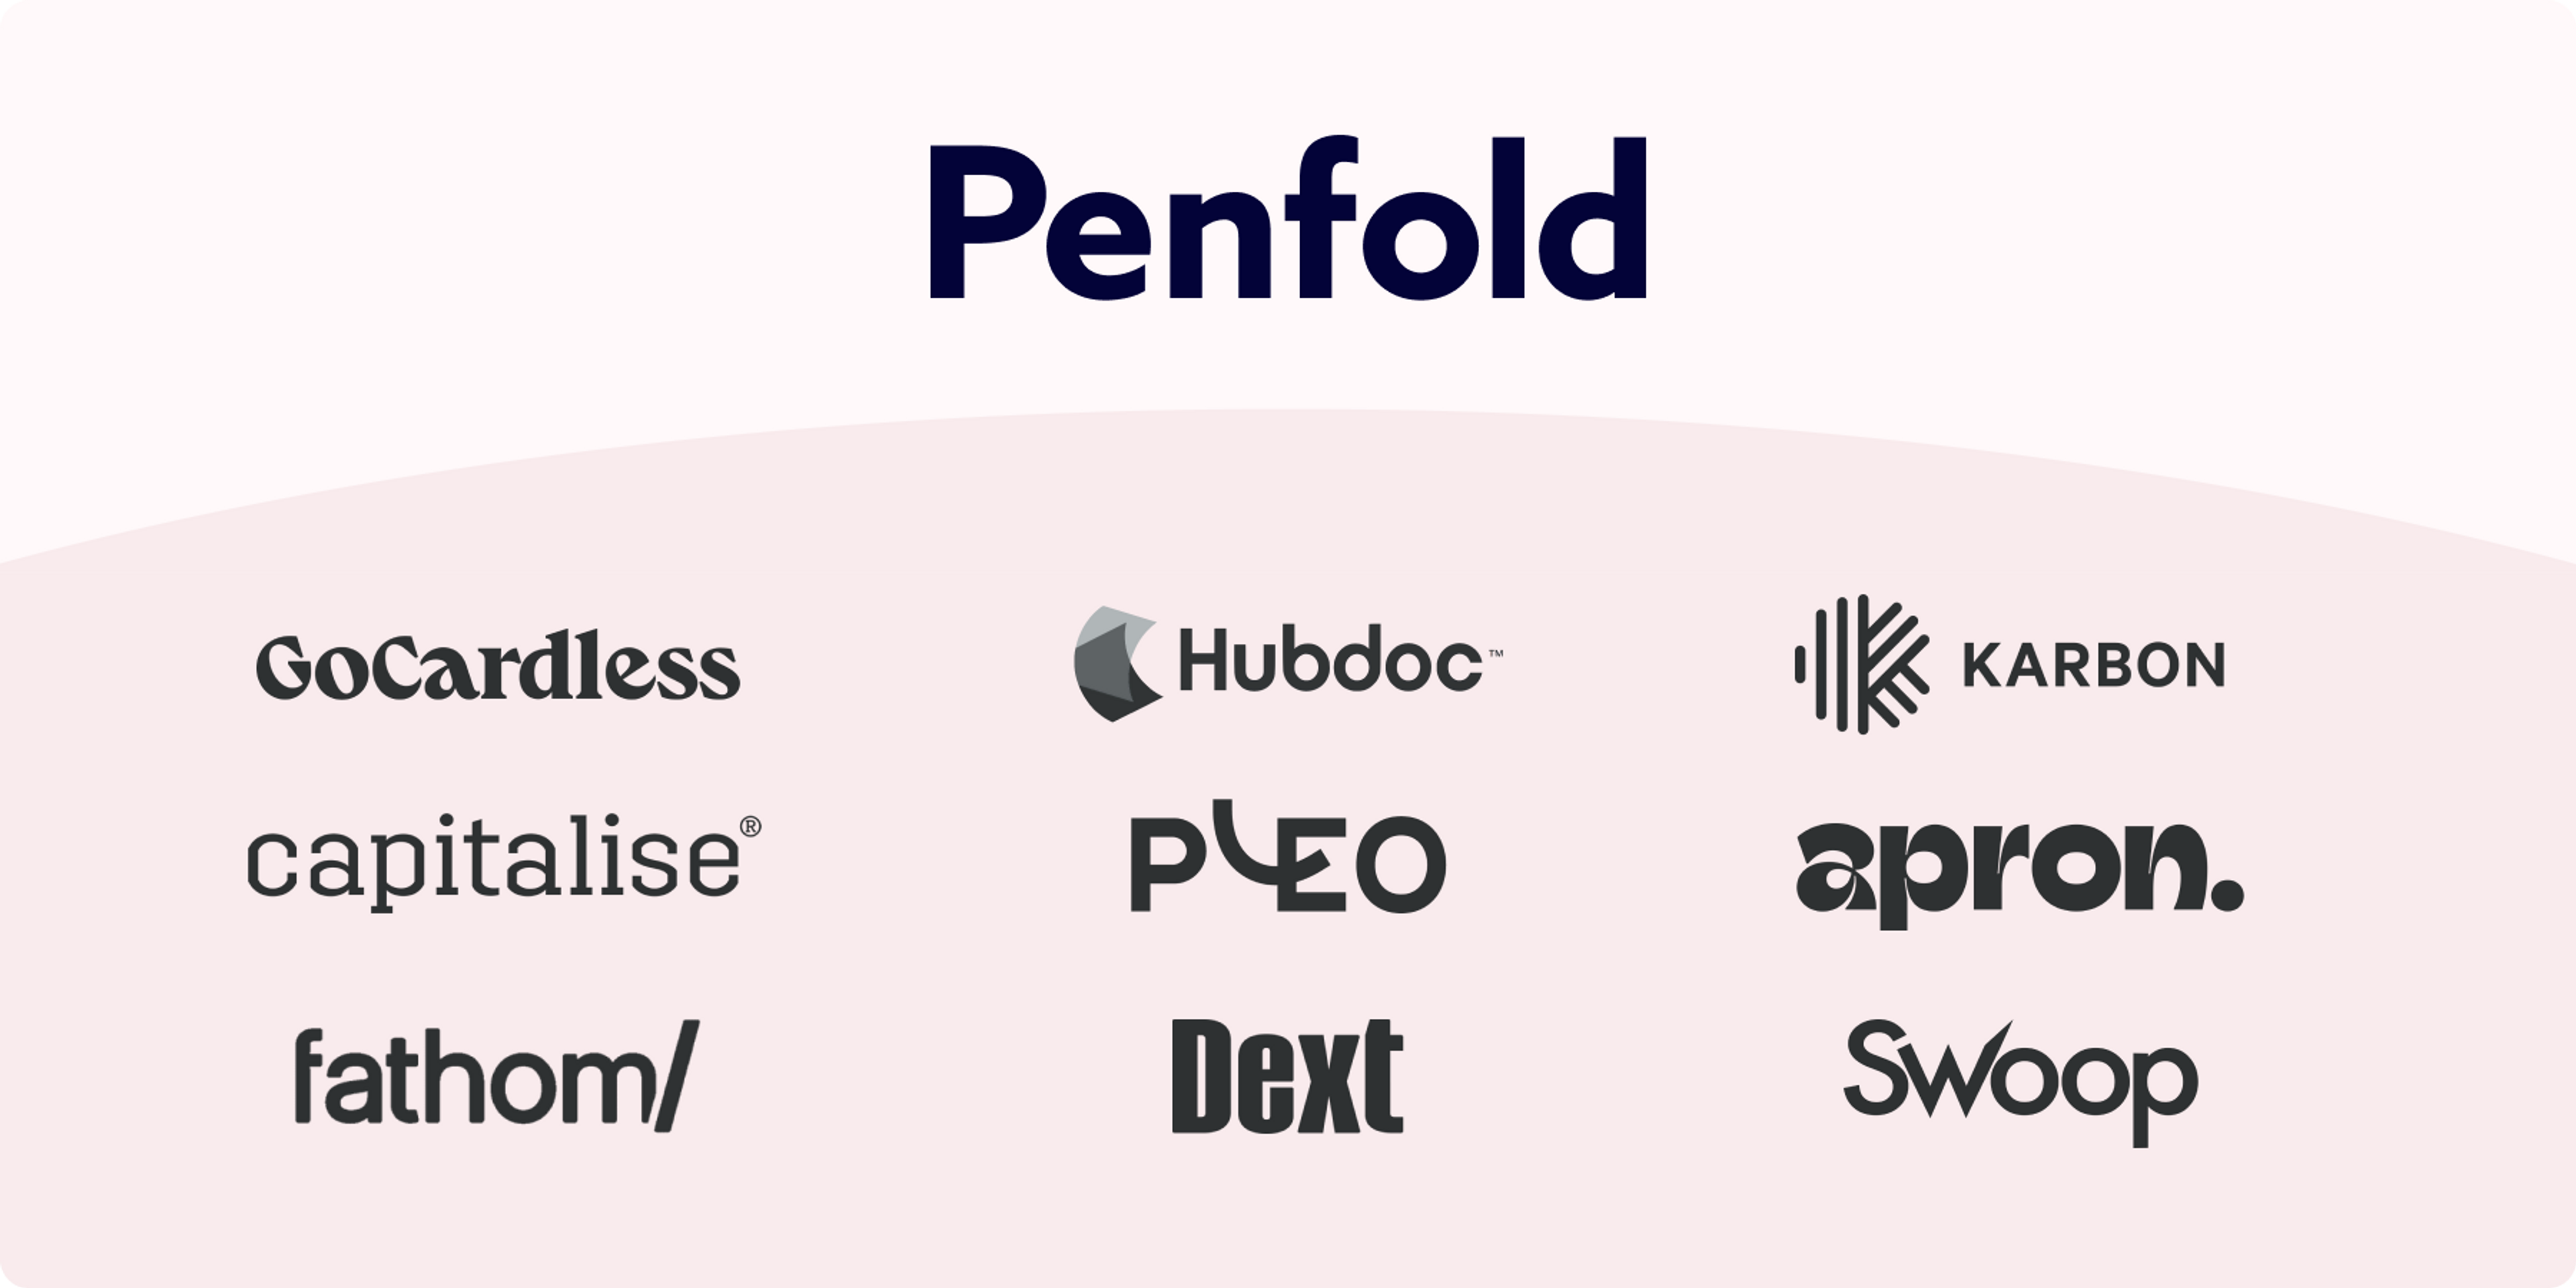 A graphic with logos of various companies under the Penfold logo. The companies include GoCardless, capitalise®, Hubdoc™, PLEO, Dext, KARBON, fathom/, apron., and Swoop.